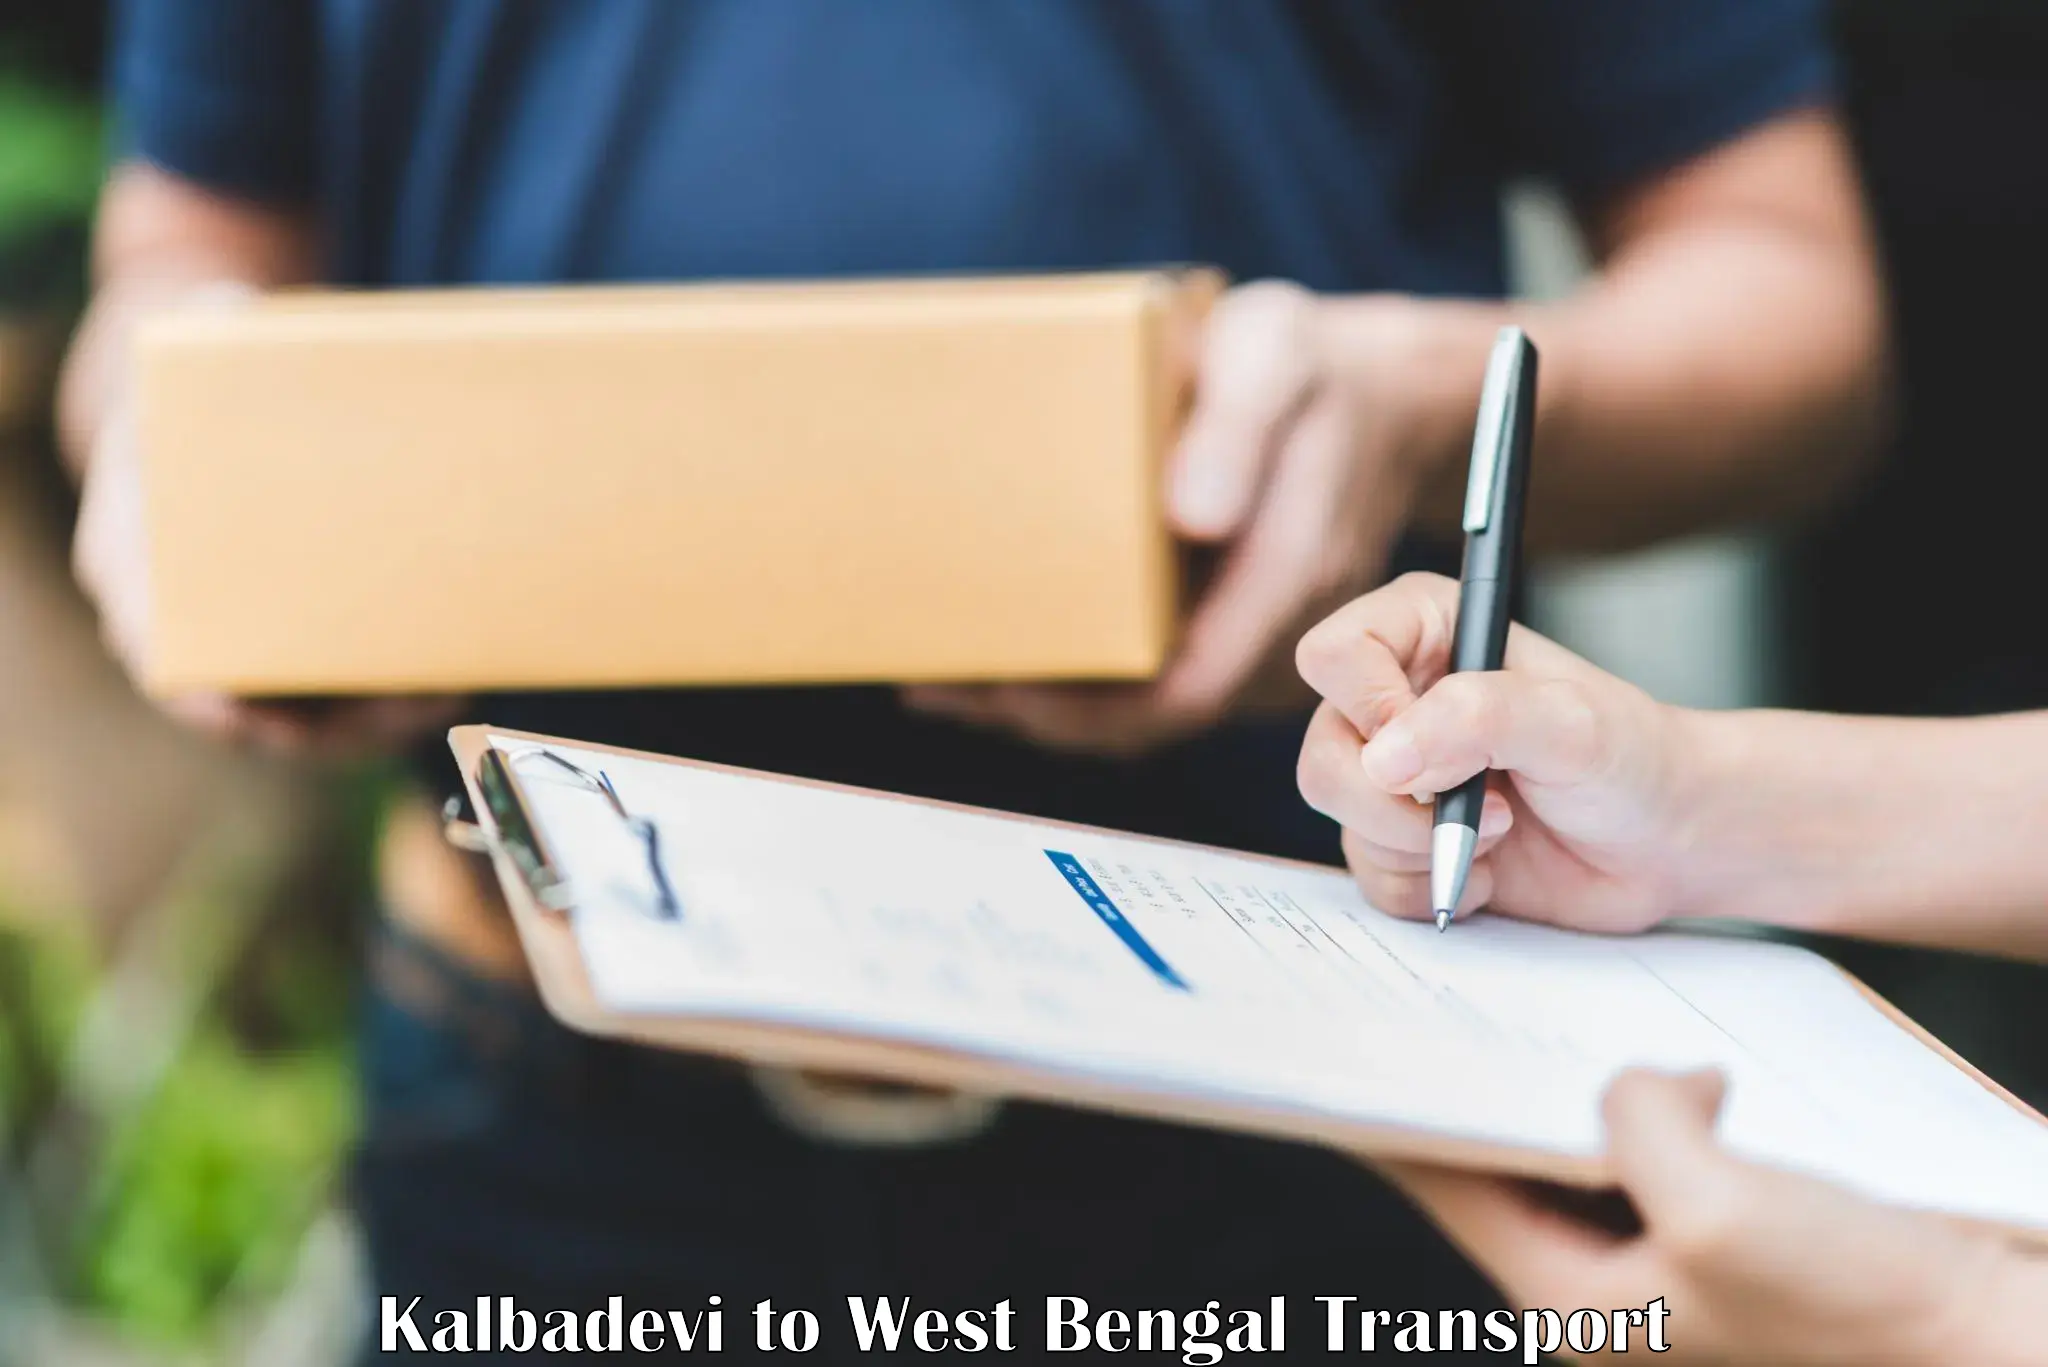 Goods delivery service Kalbadevi to West Bengal